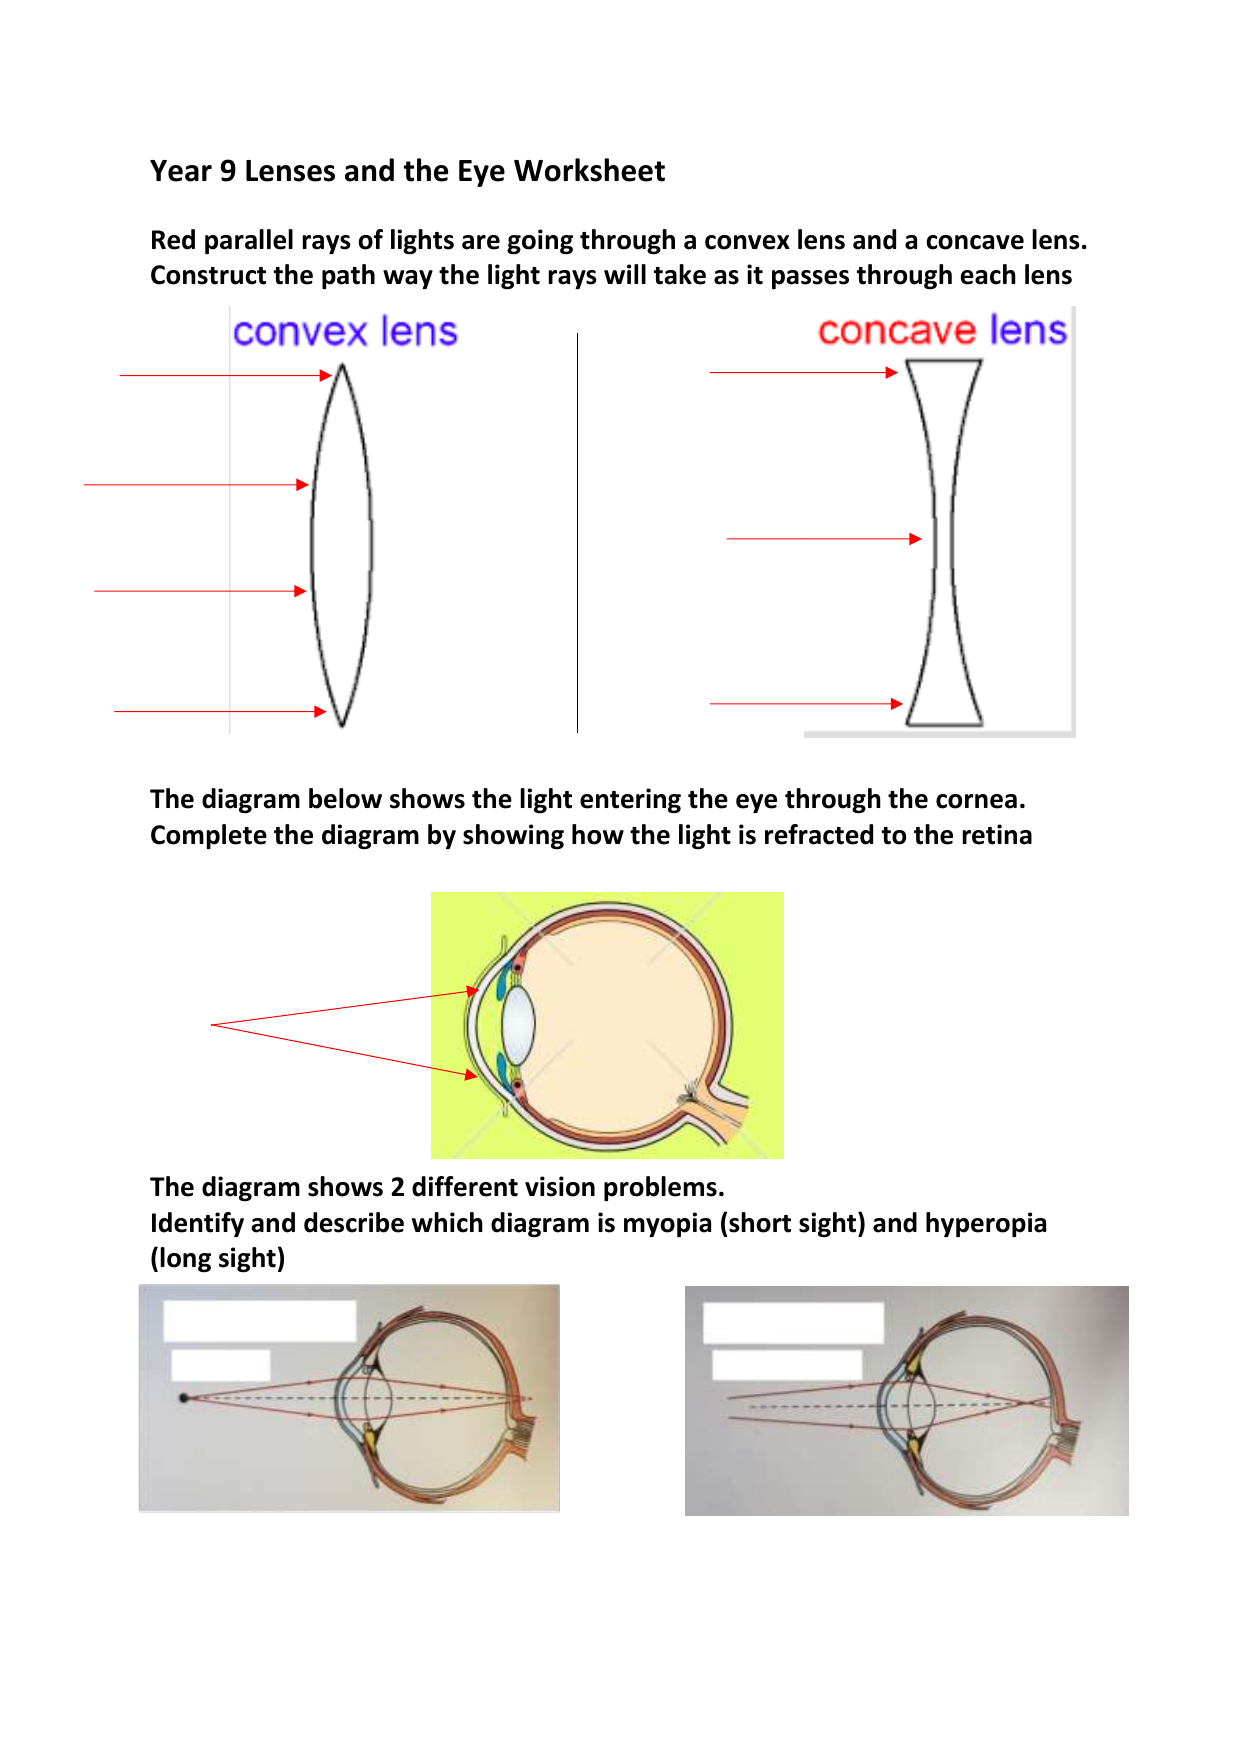 lens-refraction-diagram-refraction-of-light-by-spherical-lenses-in-the-second